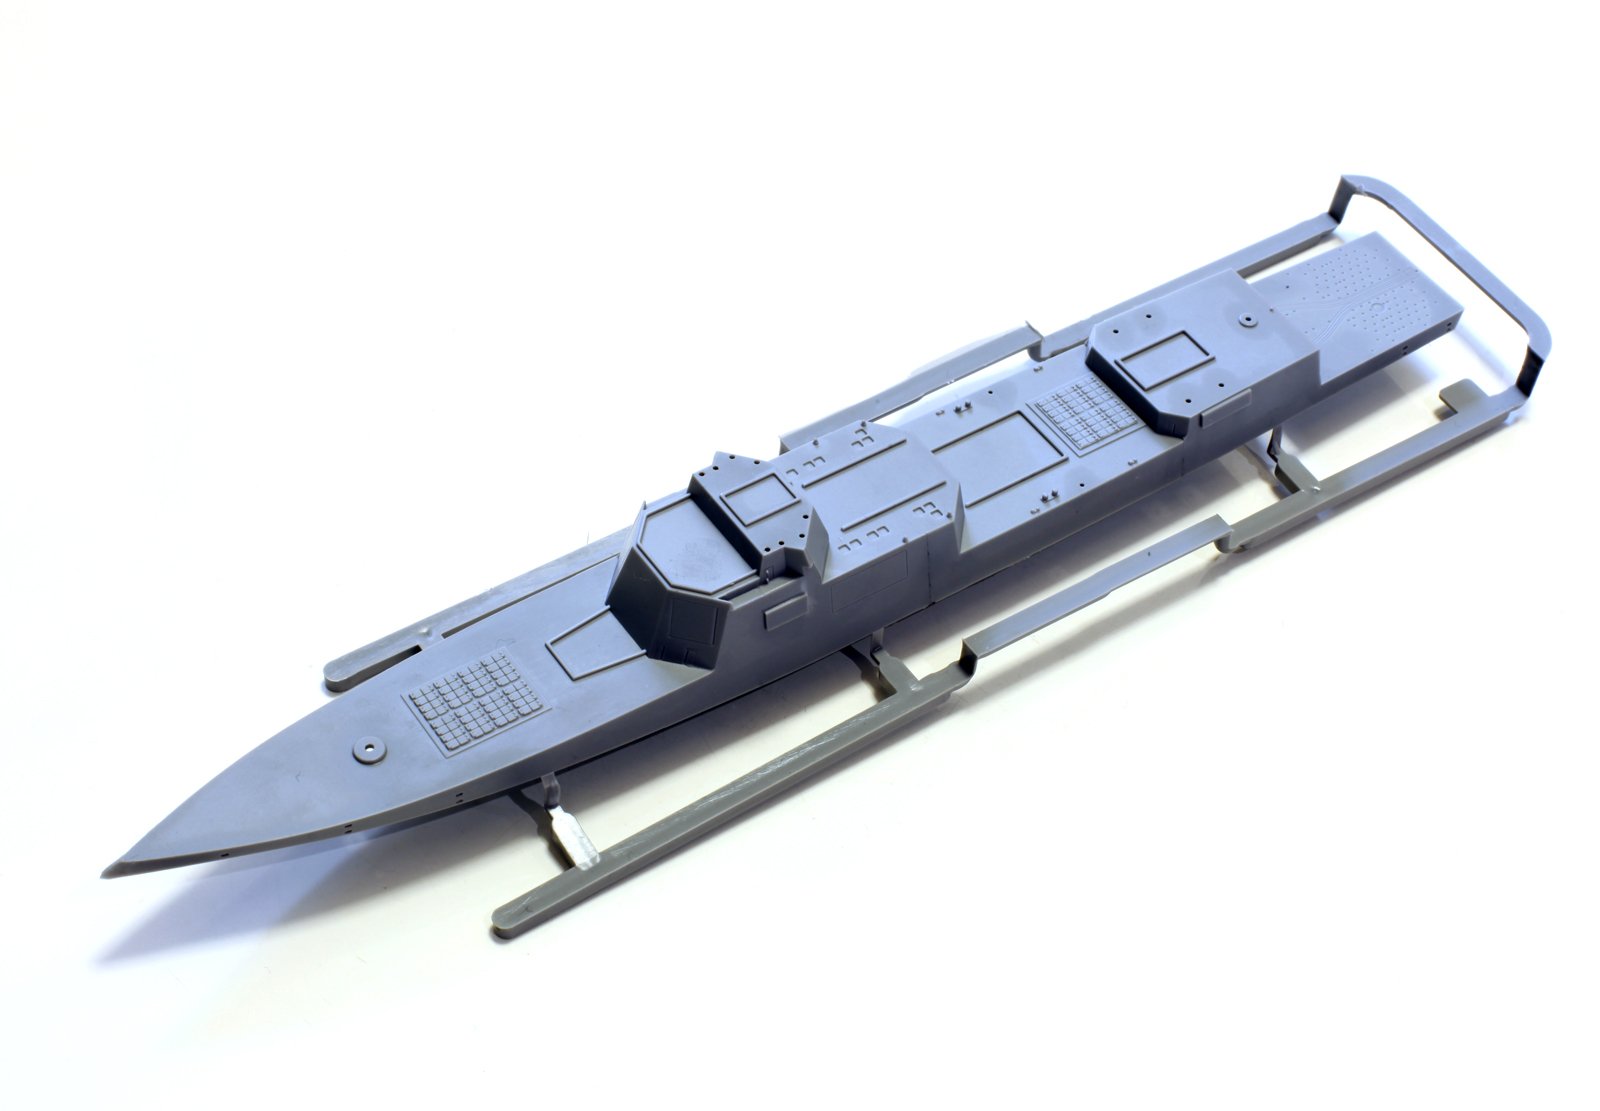 1/700 Chinese PLA Type 055 Class Destroyer - Click Image to Close